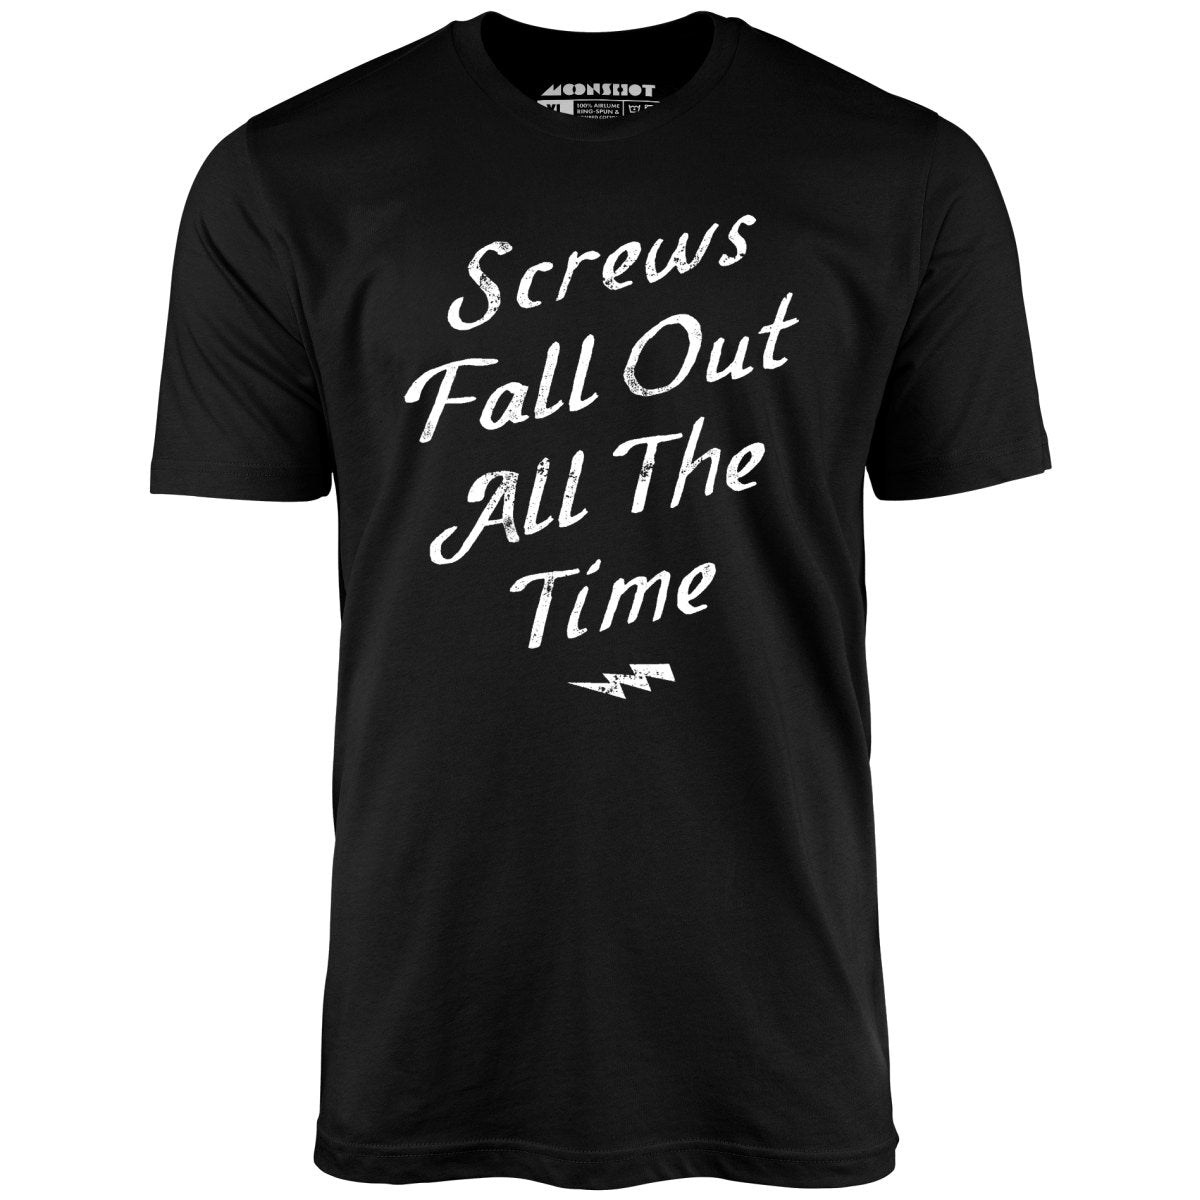 Screws Fall Out All The Time - Unisex T-Shirt